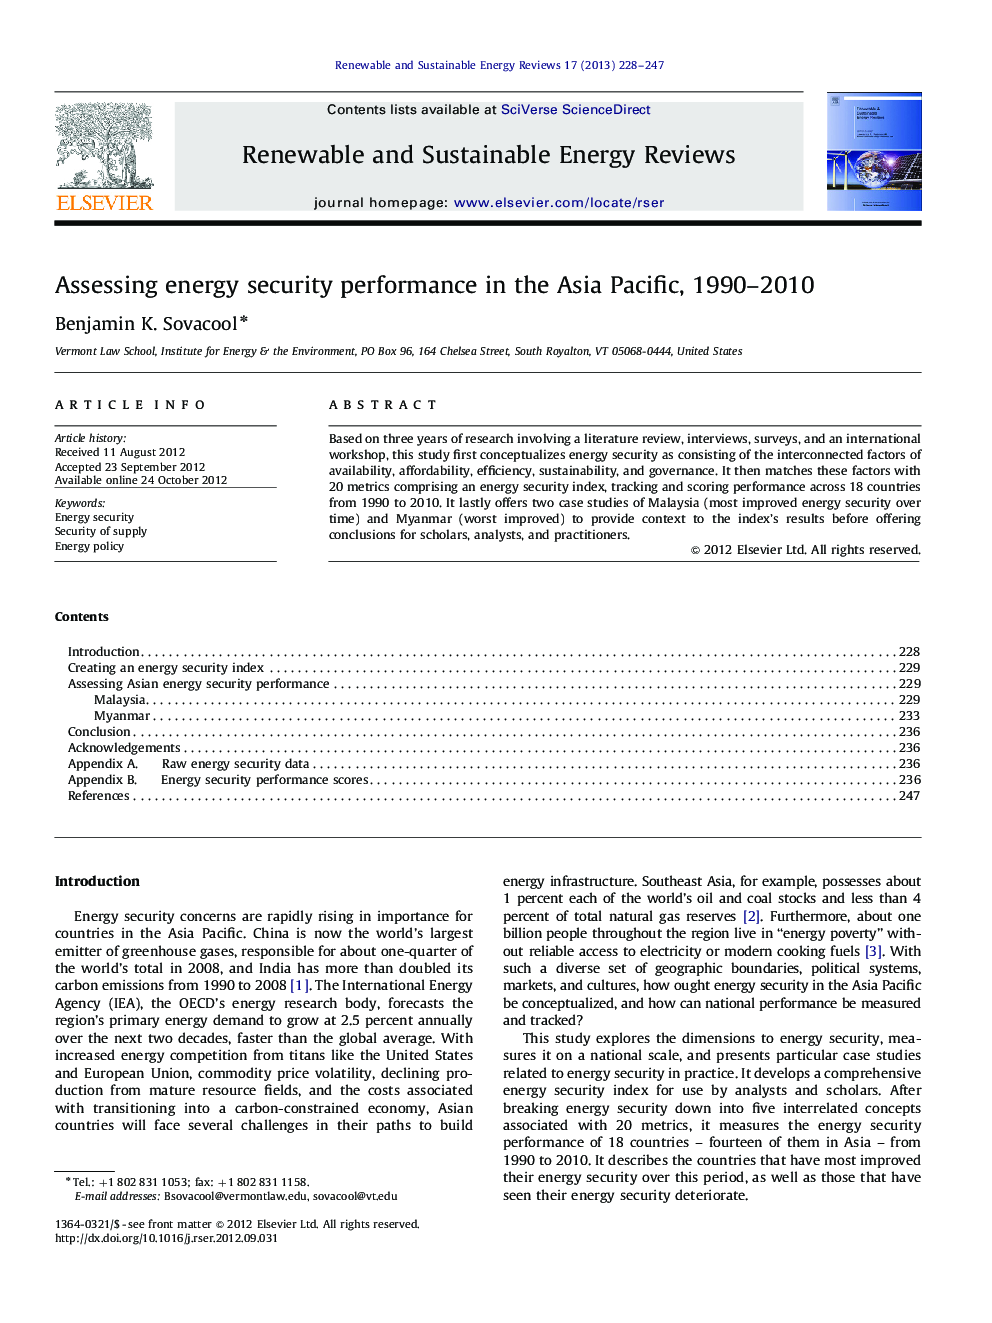 Assessing energy security performance in the Asia Pacific, 1990–2010